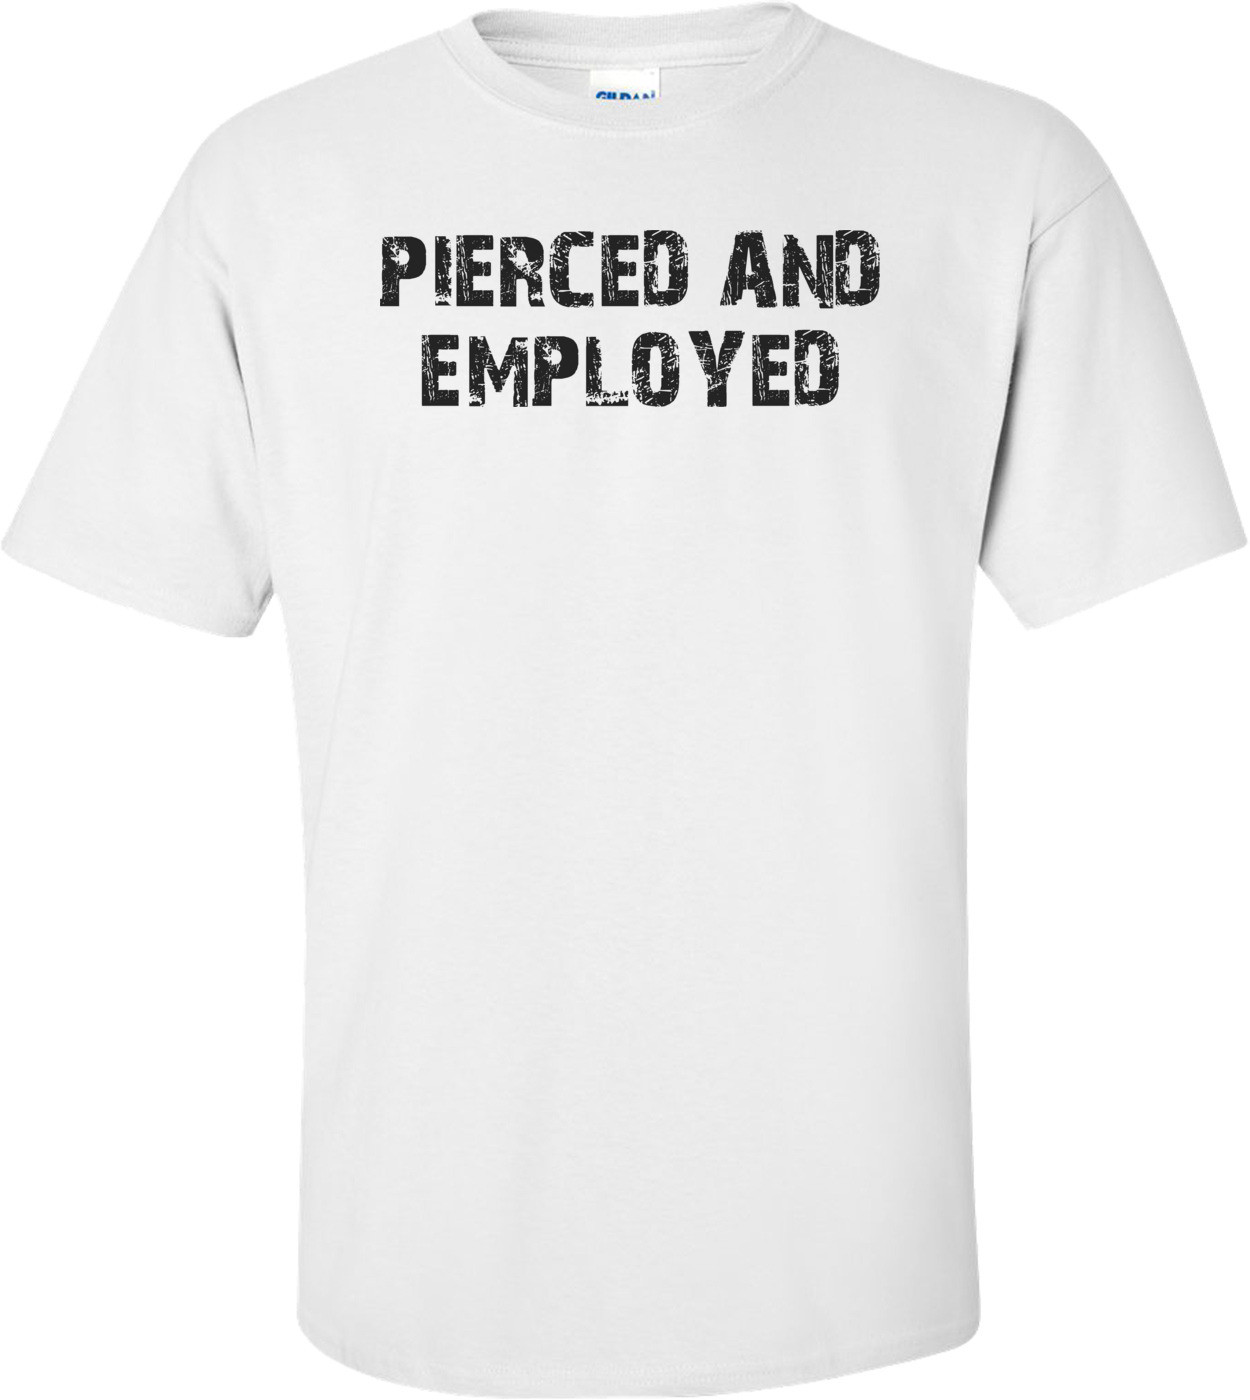 PIERCED AND EMPLOYED Shirt